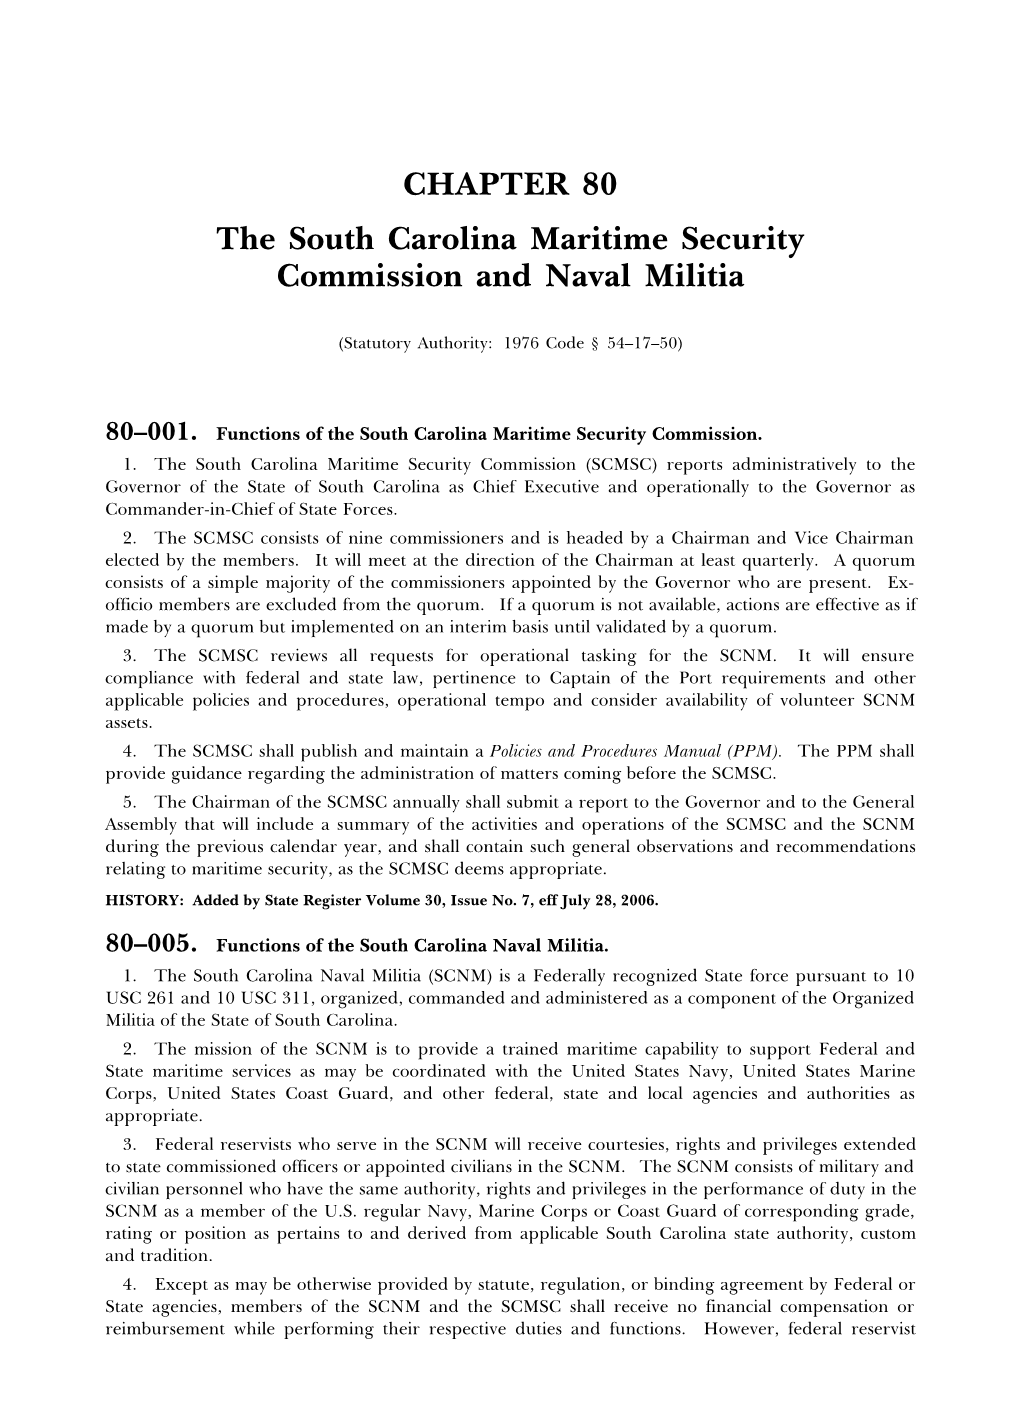 CHAPTER 80 the South Carolina Maritime Security Commission and Naval Militia